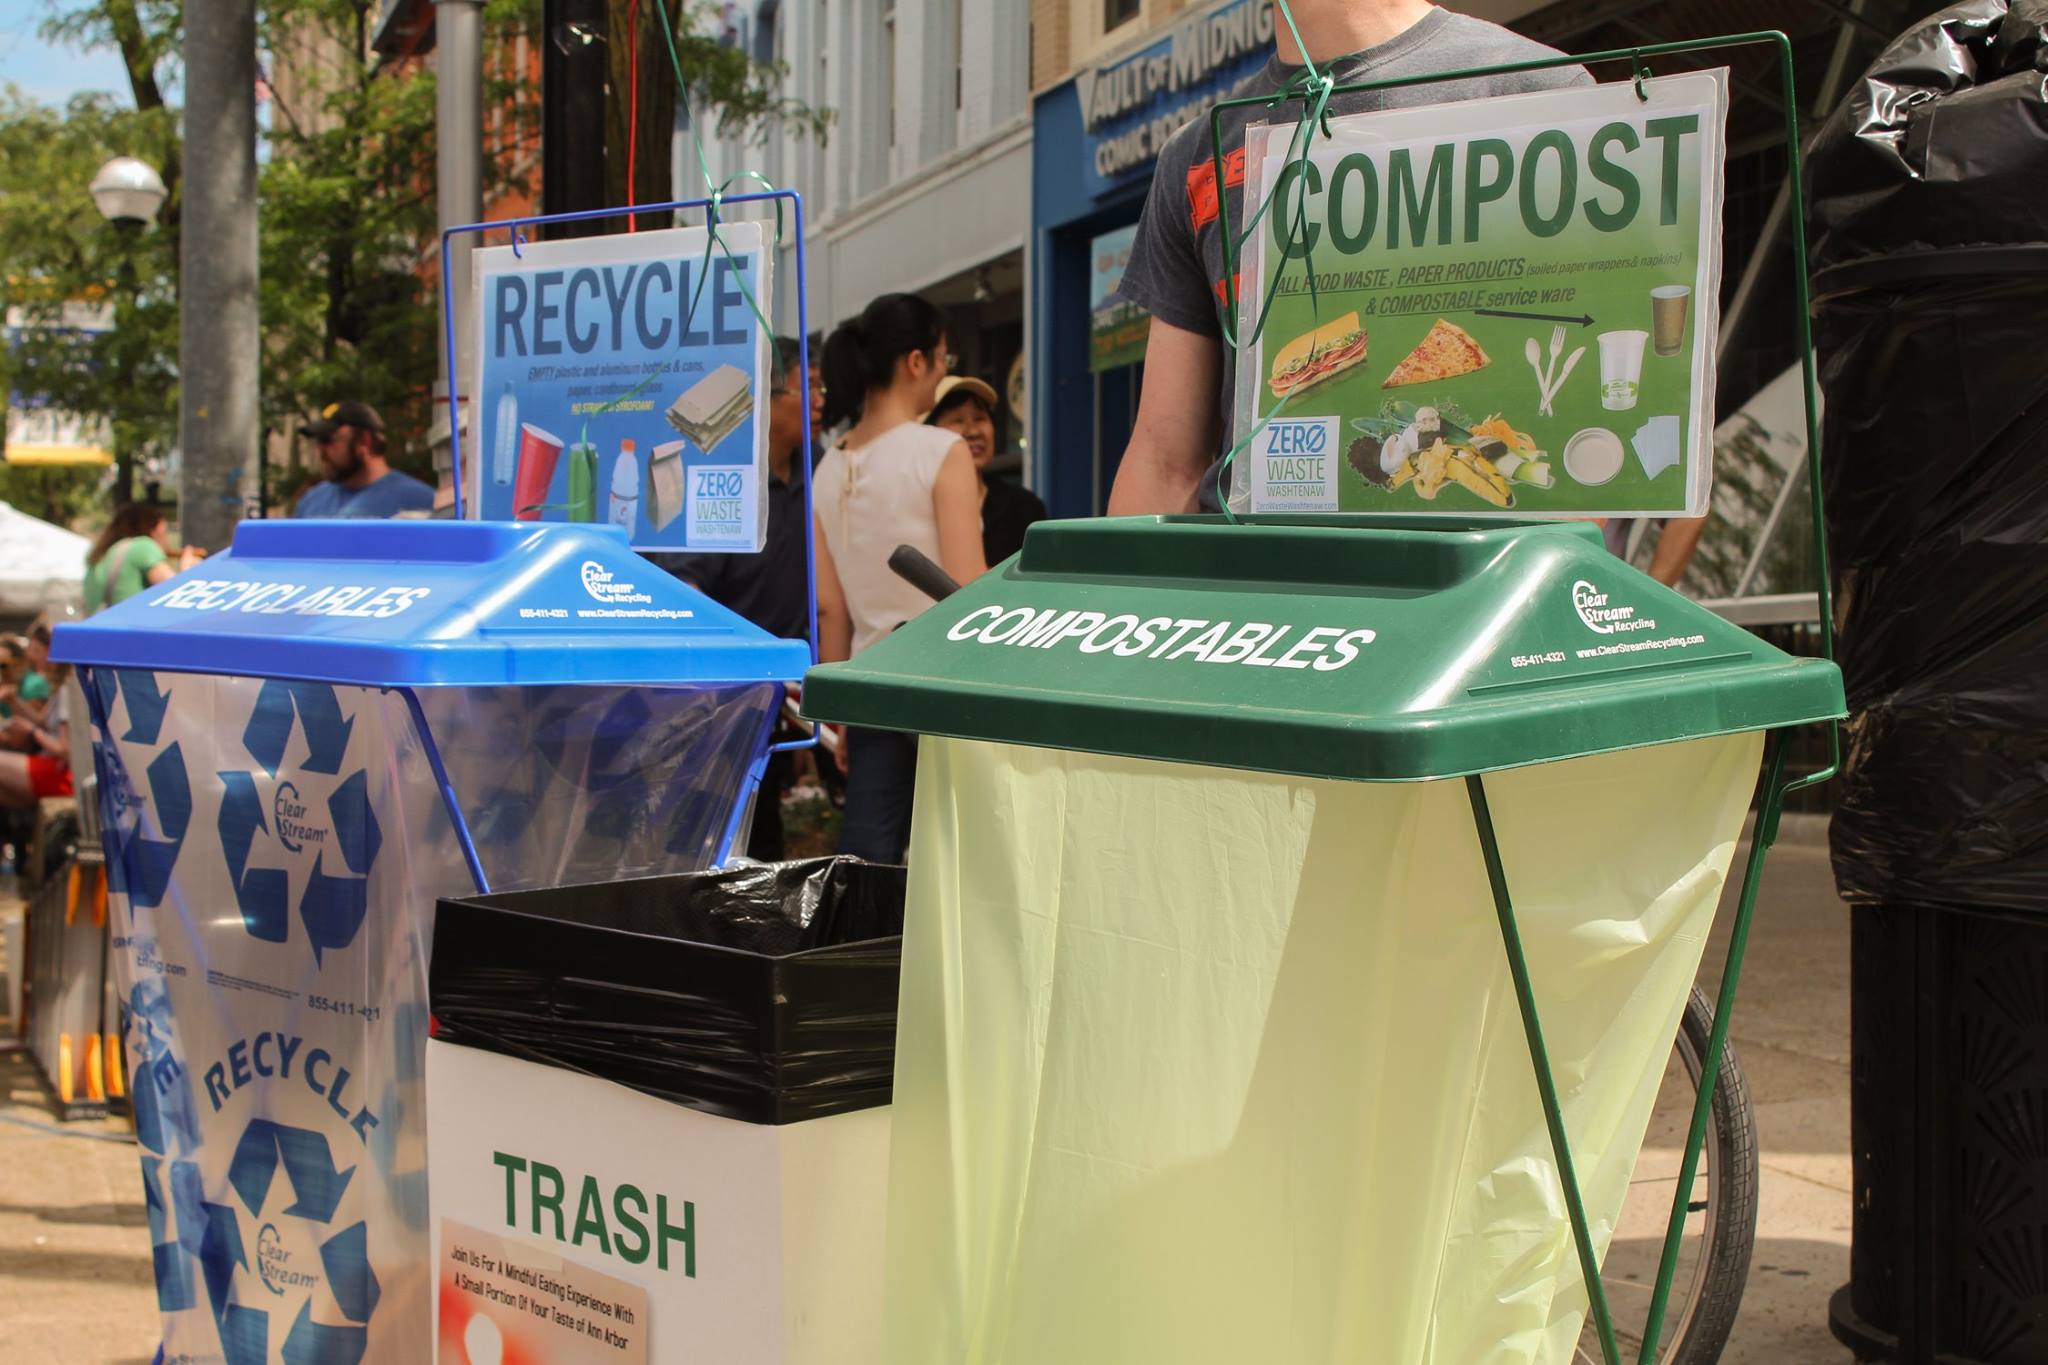 Zero Waste Washtenaw: Working with Community Events to Divert 6.4 Tons of Waste Since 2015